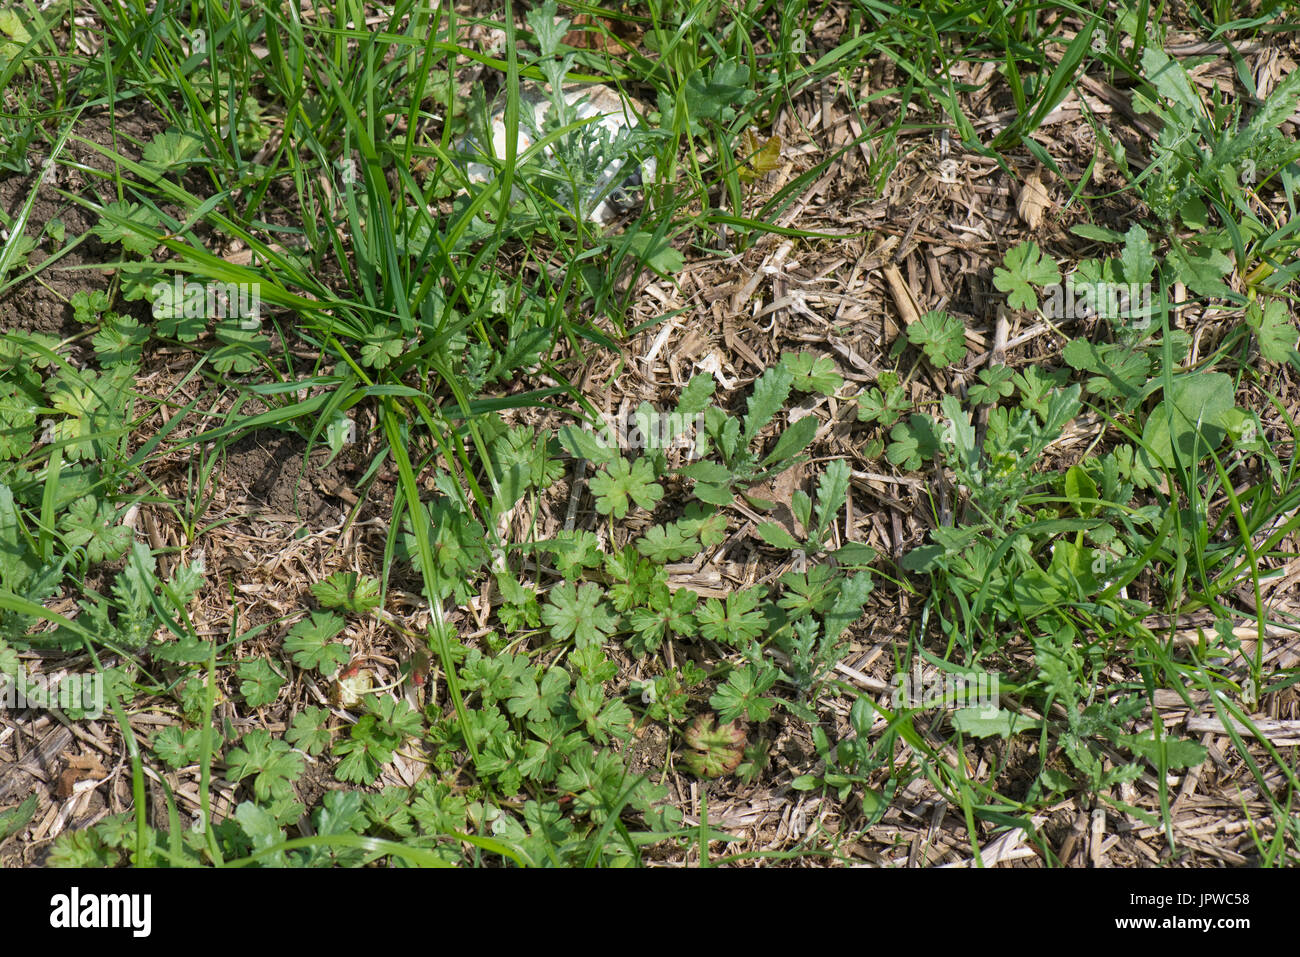 Mixed broad-leaved weeds including plantains, cranesbill, groundsel, mayweed and others germinating in a new grass ley. Stock Photo